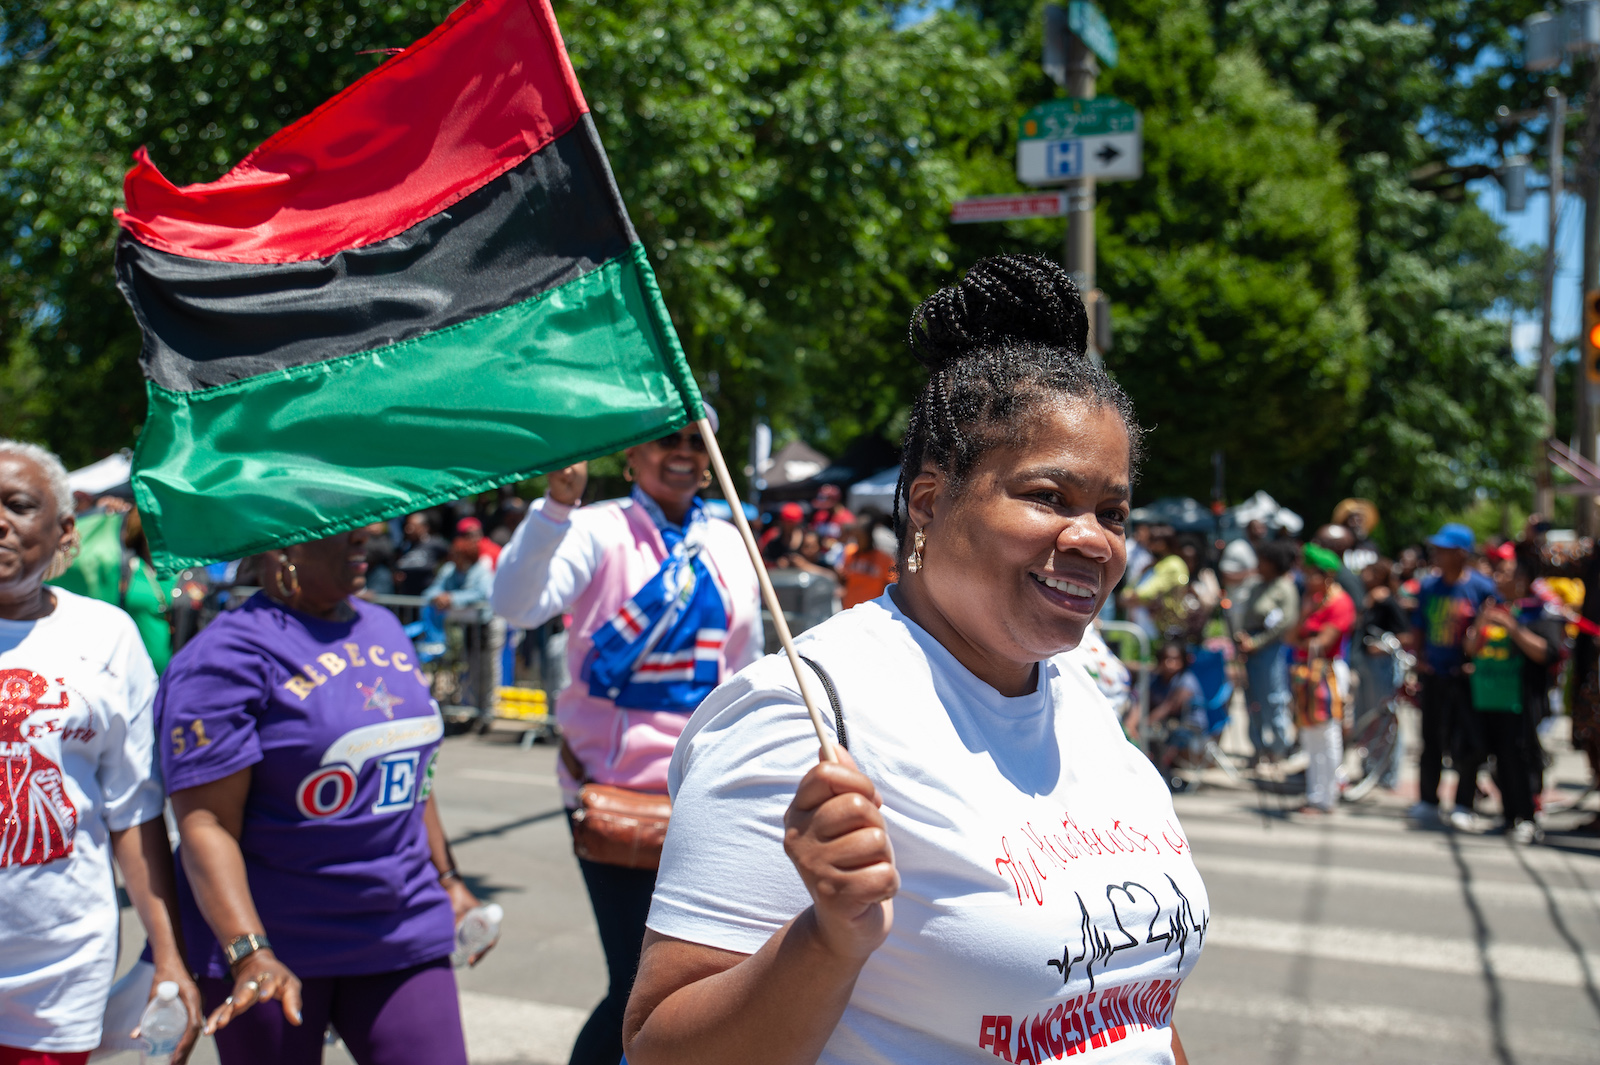 A Juneteenth parade with a woman waving a flag